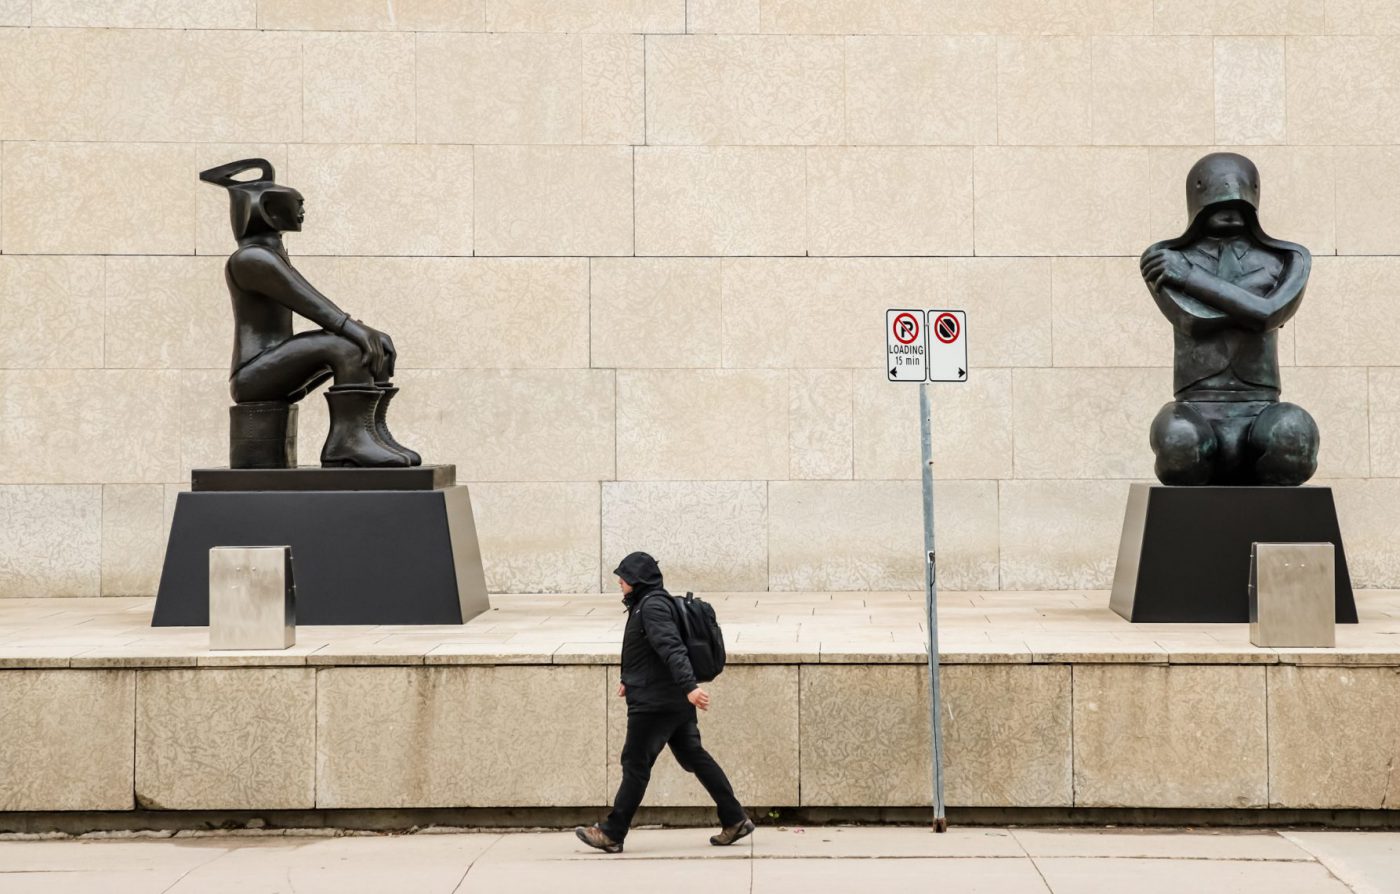 A person walks briskly past the Winnipeg Art Gallery-Qaumajuq, in front of two sculptures by Ivan Eyre, 